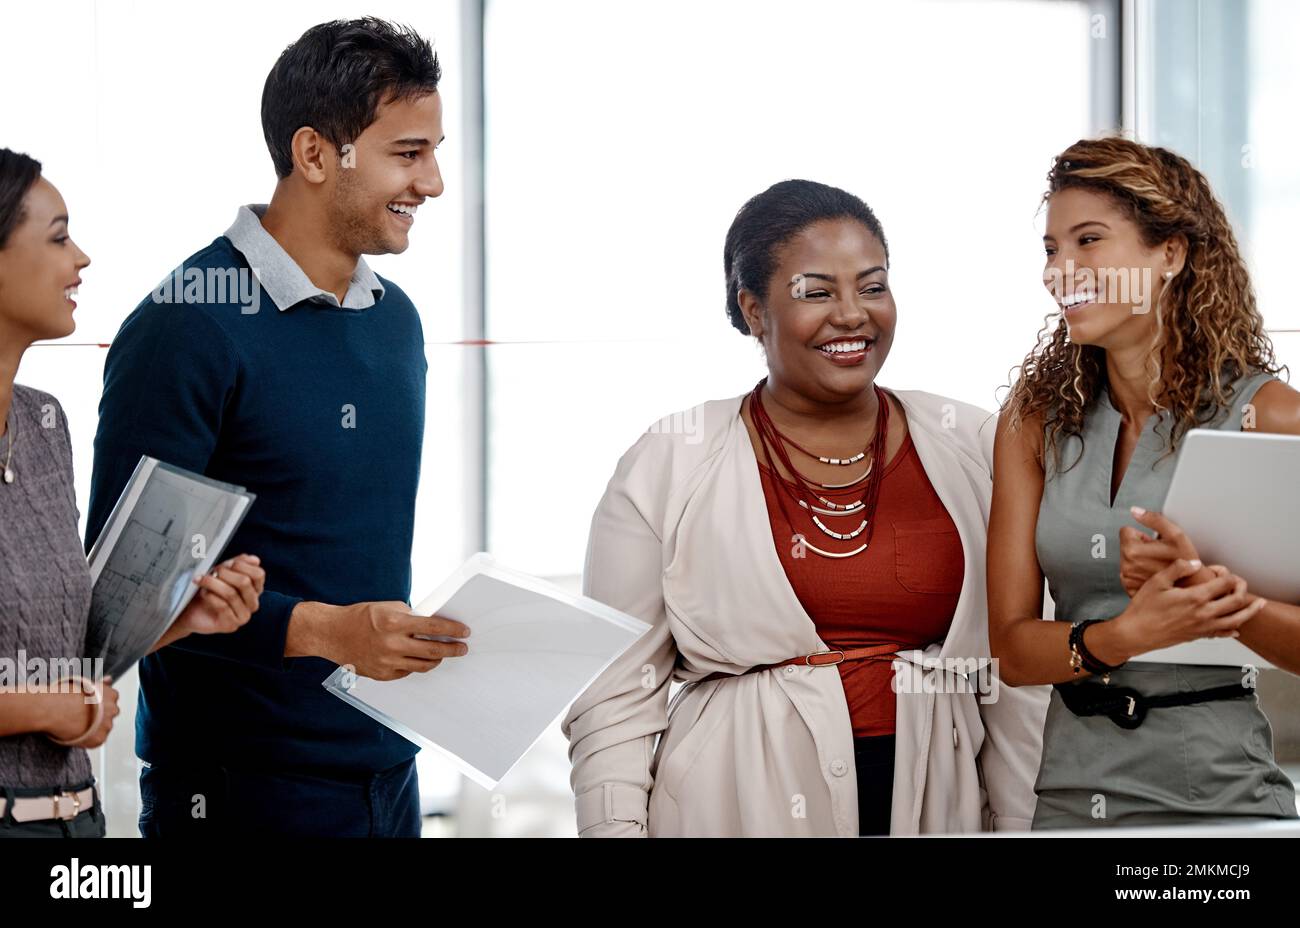 Were always making work fun. a young diverse group of colleagues sharing a laugh together in the office. Stock Photo